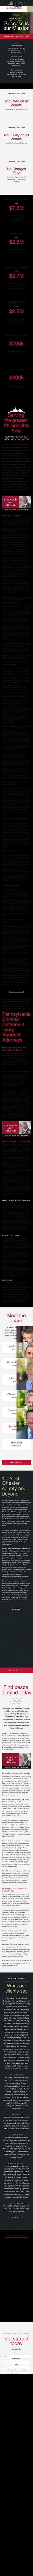 Ciccarelli Law Offices - Exton PA Lawyers